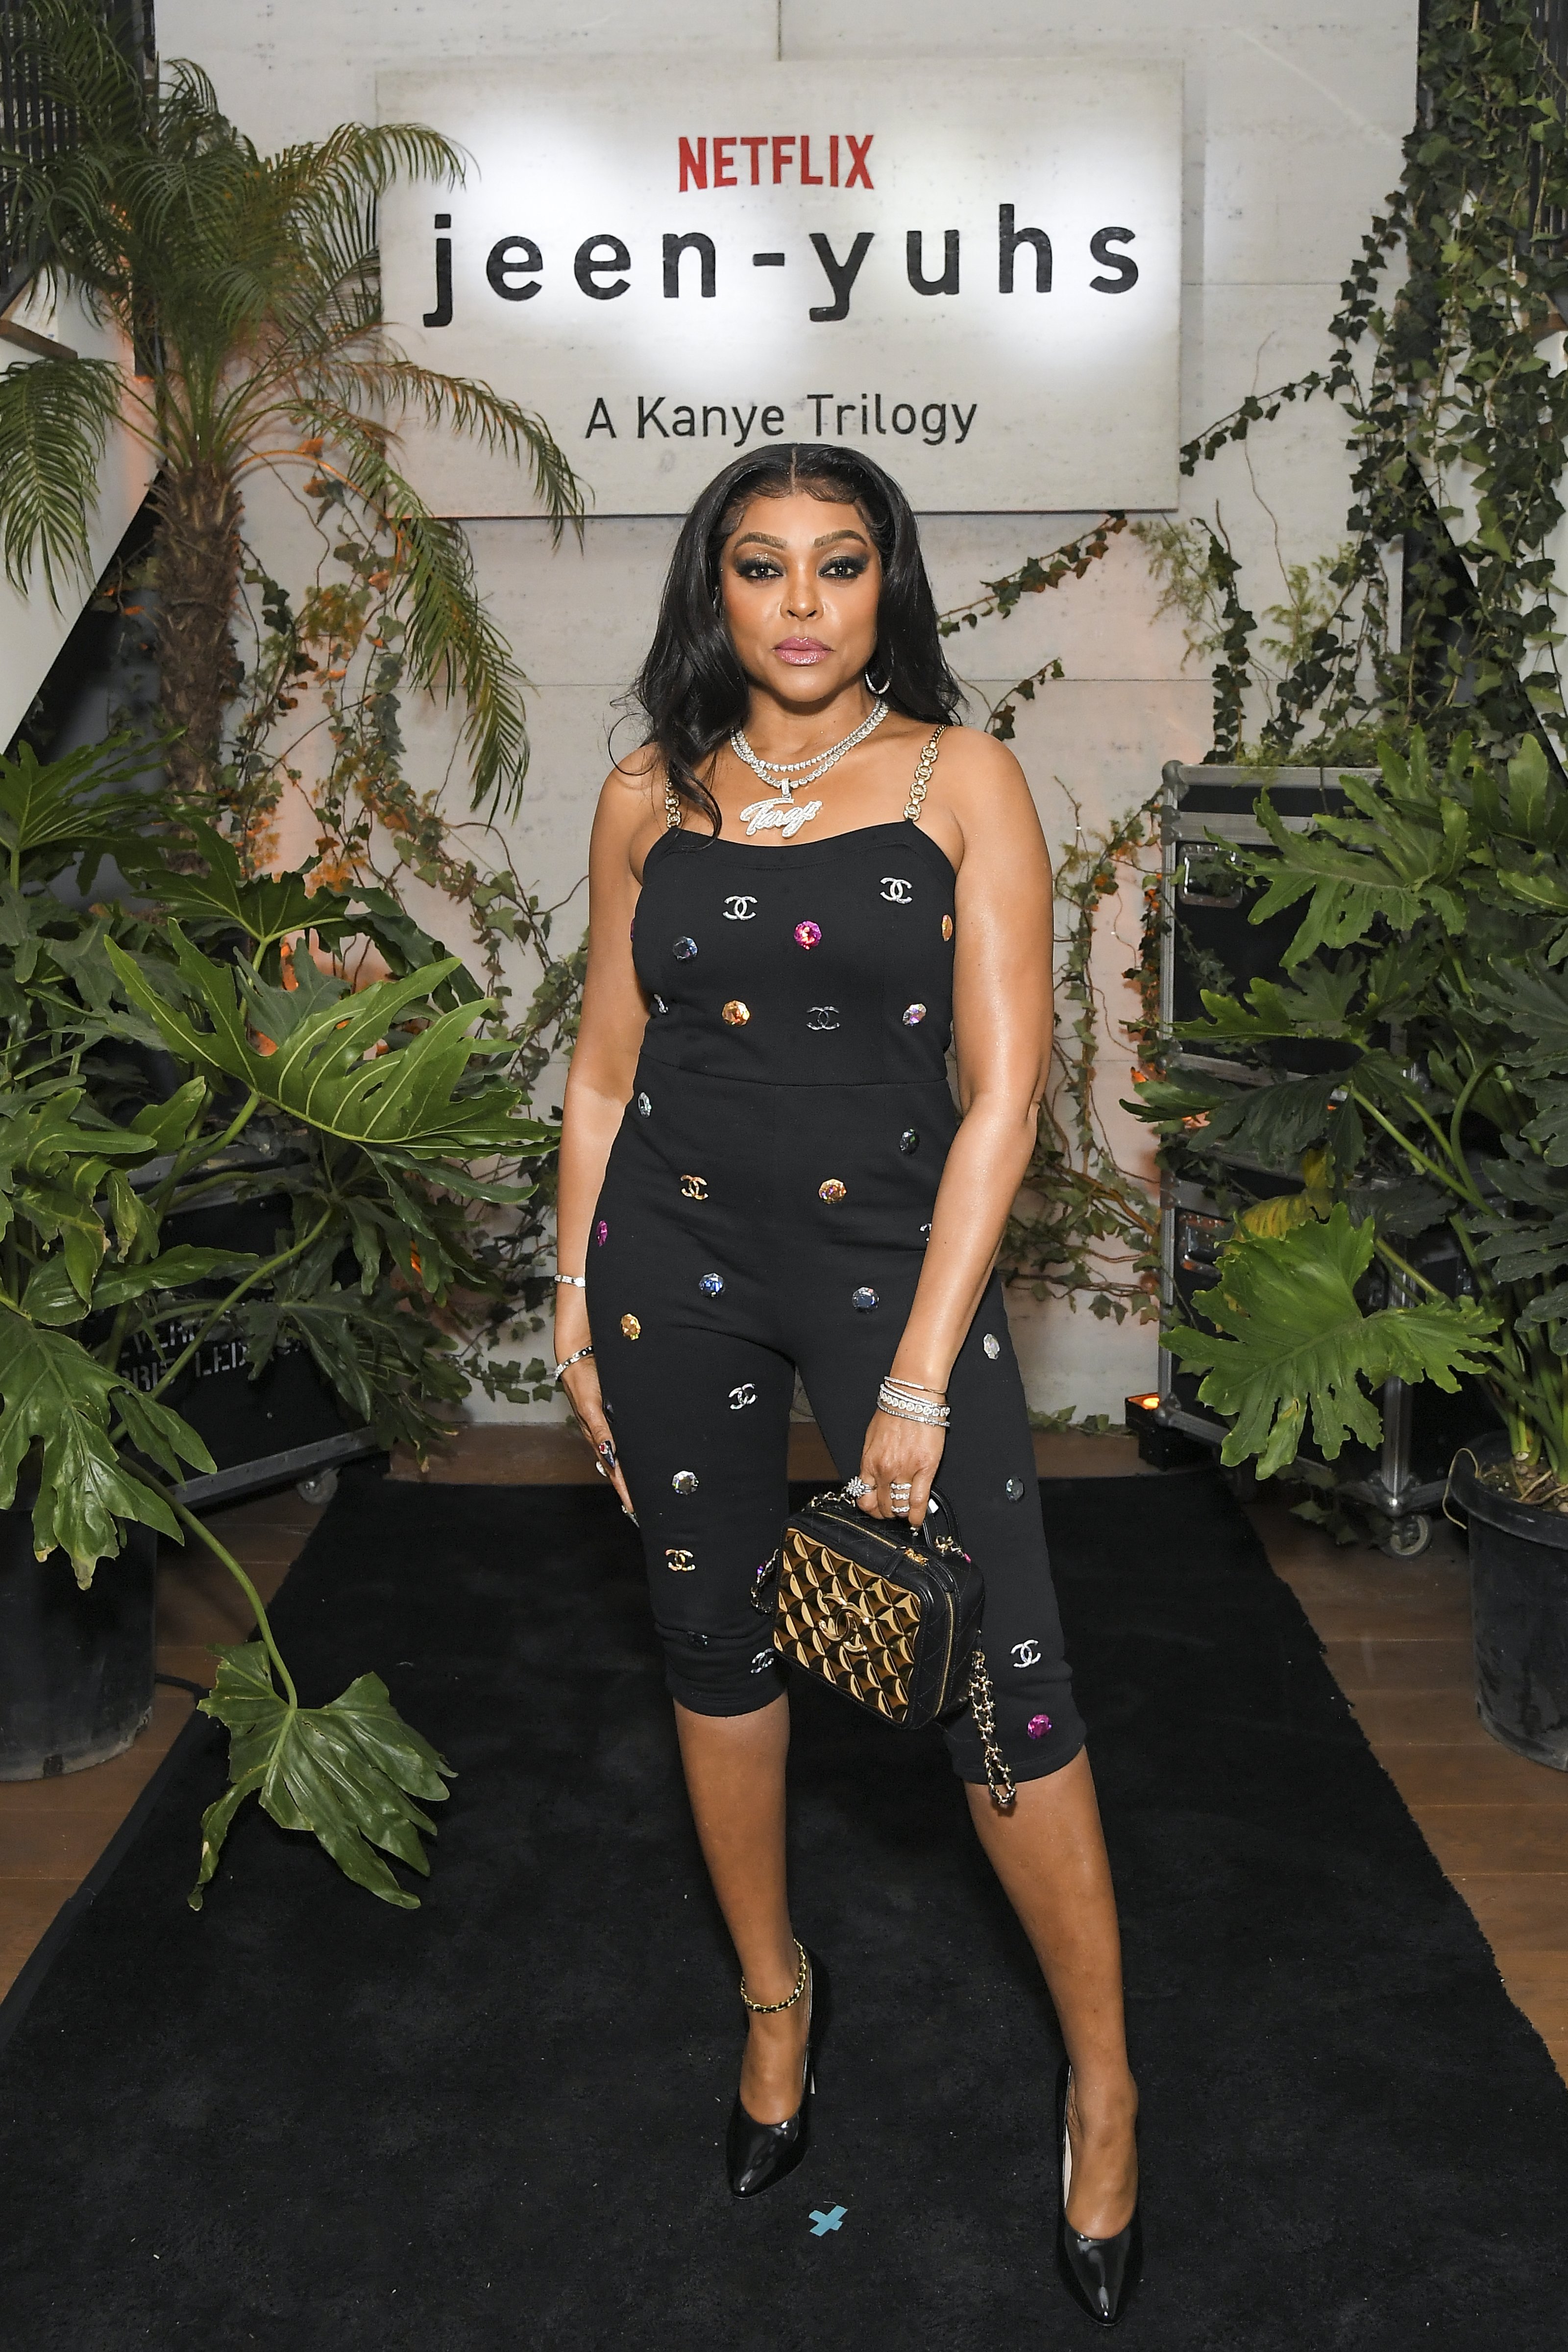 Taraji P. Henson poses at the jeen-yuhs experience and special screening celebrating Netflix's new documentary, "jeen-yuhs: A Kanye Trilogy" at Mother Wolf on February 11, 2022, in Los Angeles, California | Source: Getty Images